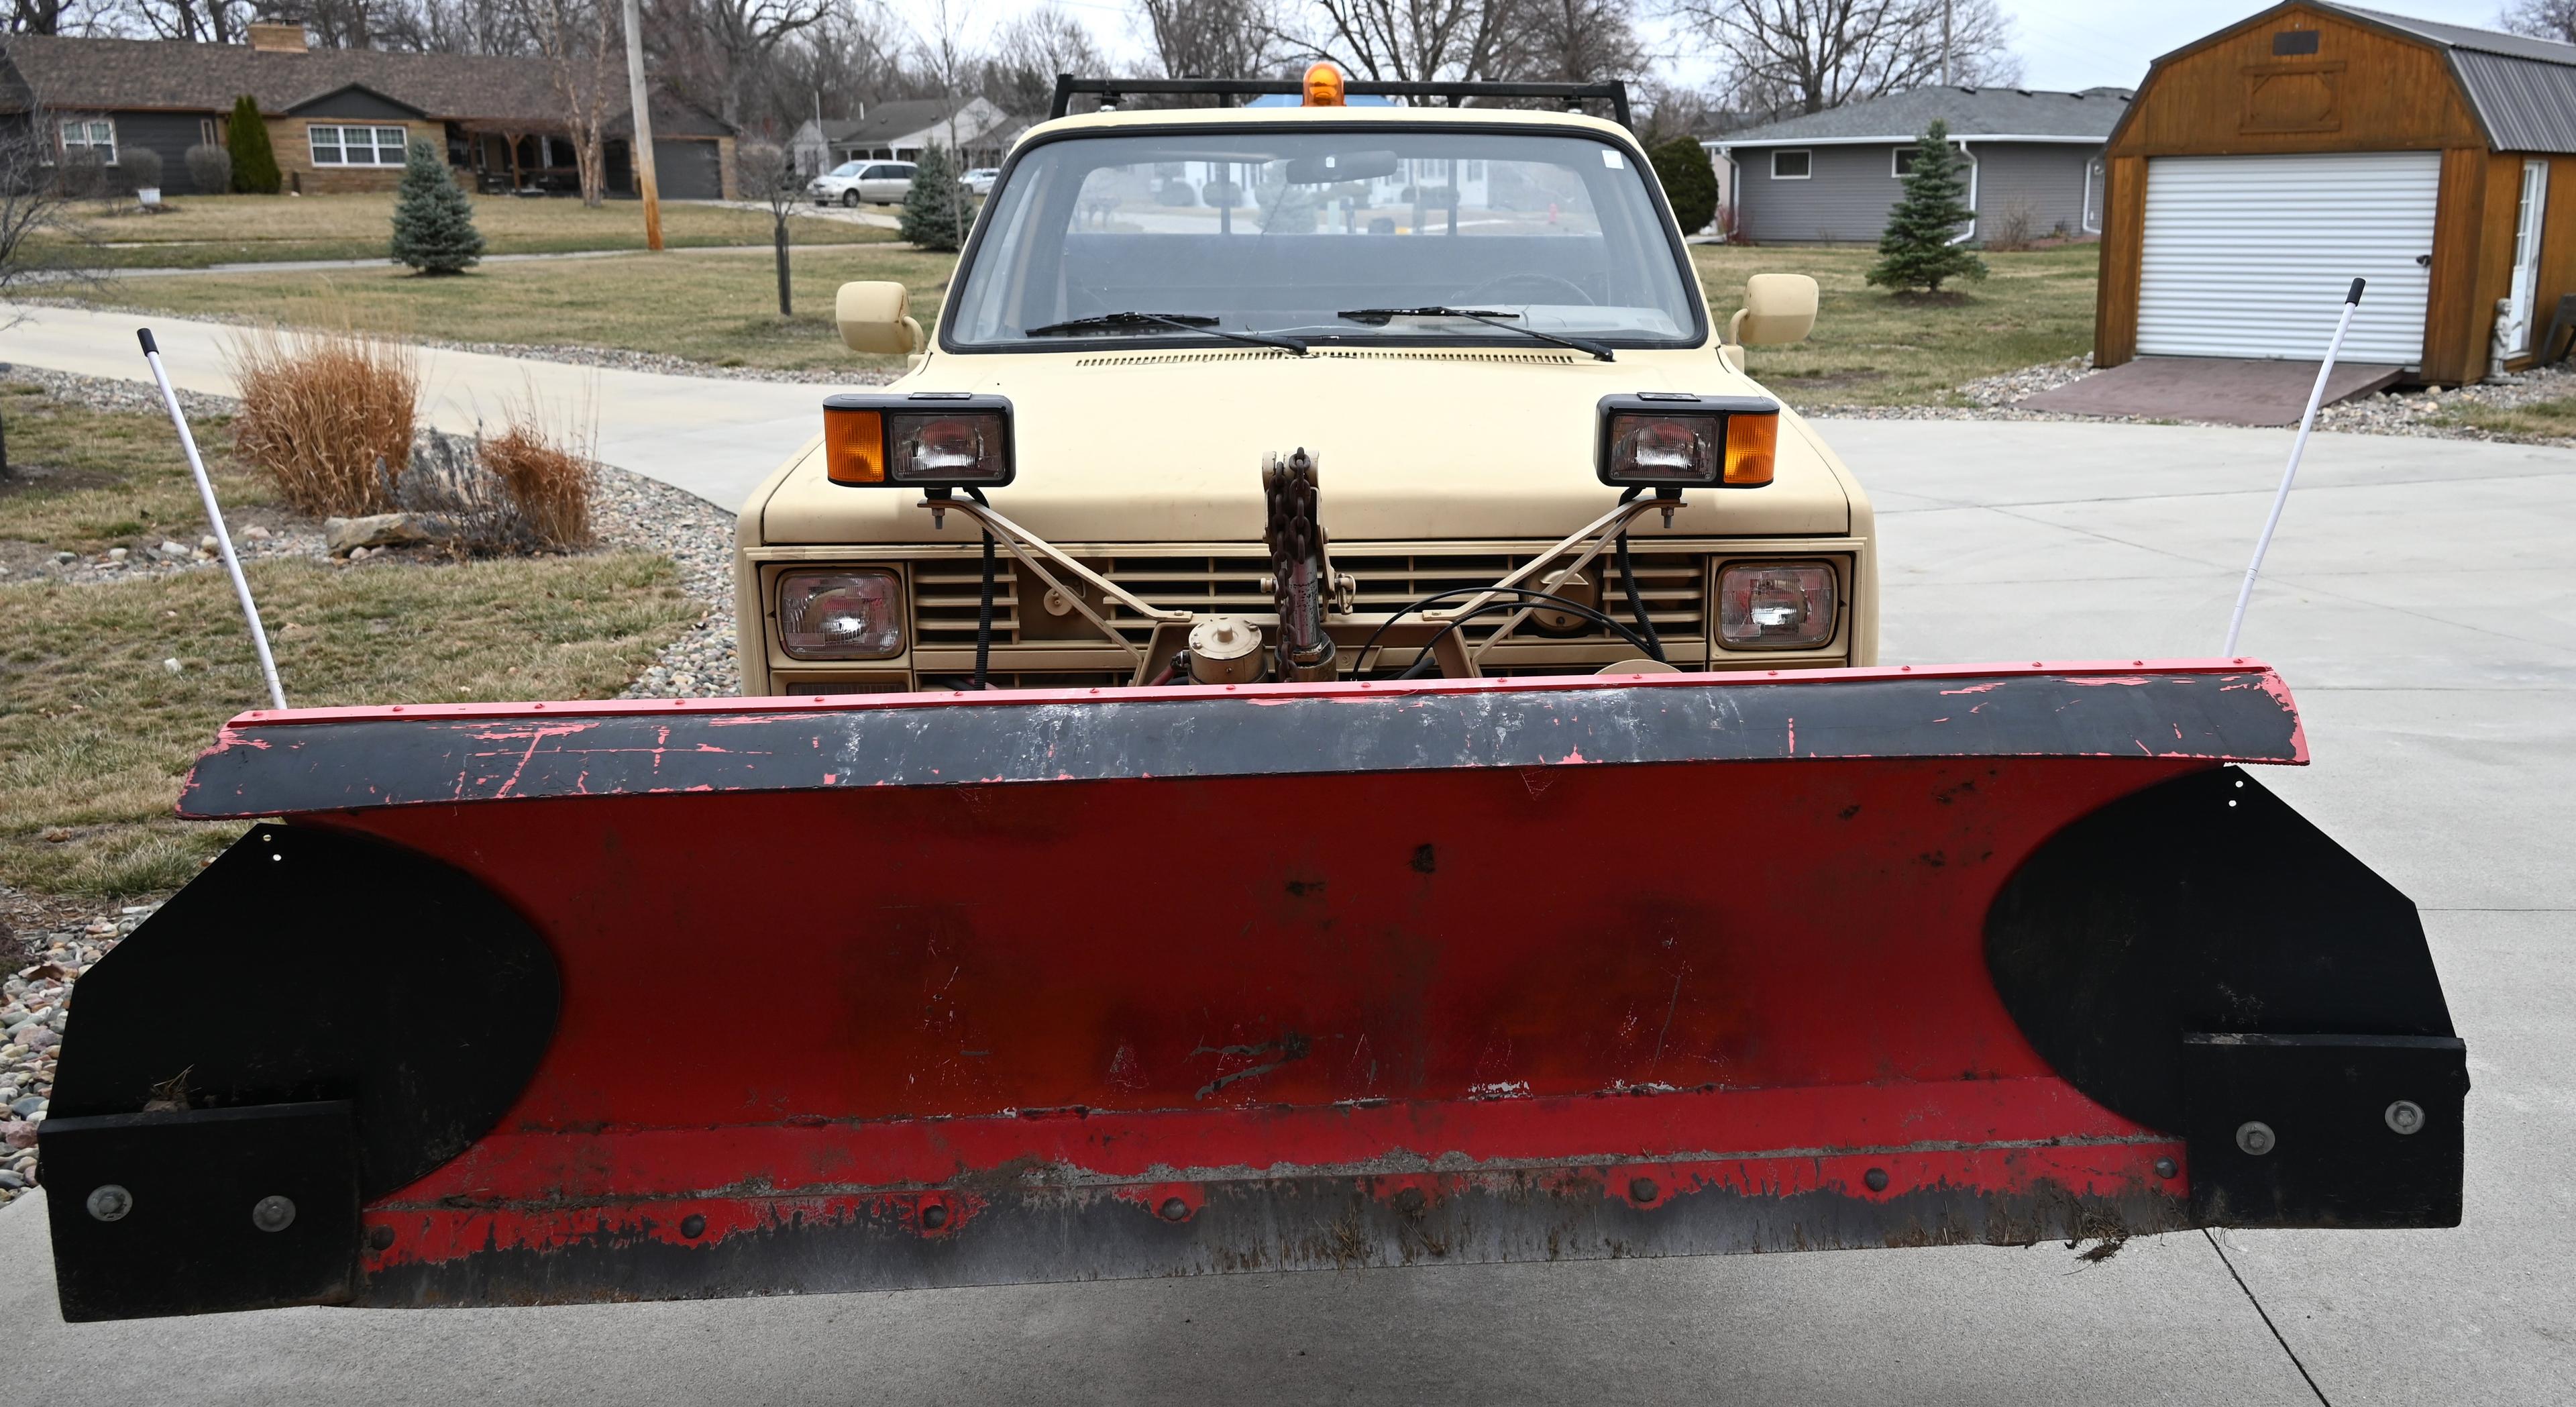 1986 Chevrolet CD-30903 Military CUCV 3600Lb Payload Pick-up Truck with snow plow